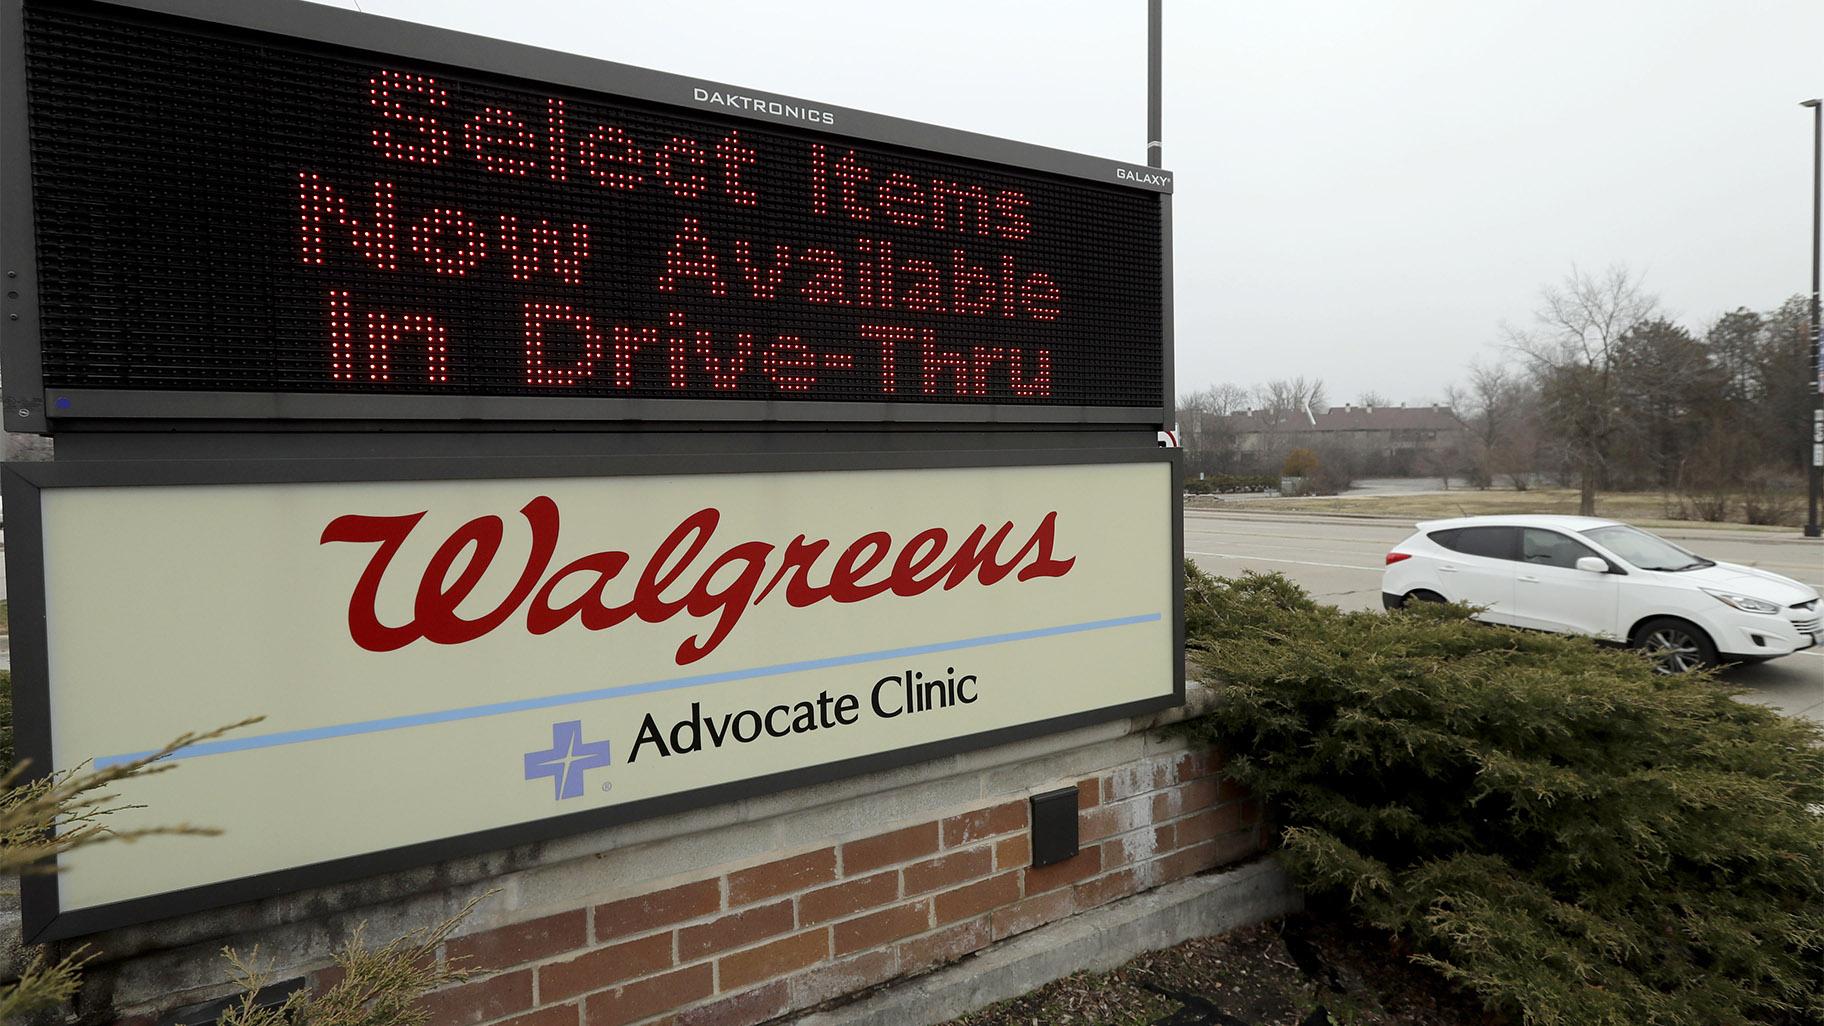 FILE - In this March 27, 2020, file photo, a Walgreens sign is displayed outside the store in Wheeling, Ill. Walgreens will hike starting pay to 5 an hour beginning in October, as employers across the United States continue boosting wages to attract workers. (AP Photo / Nam Y. Huh, File)